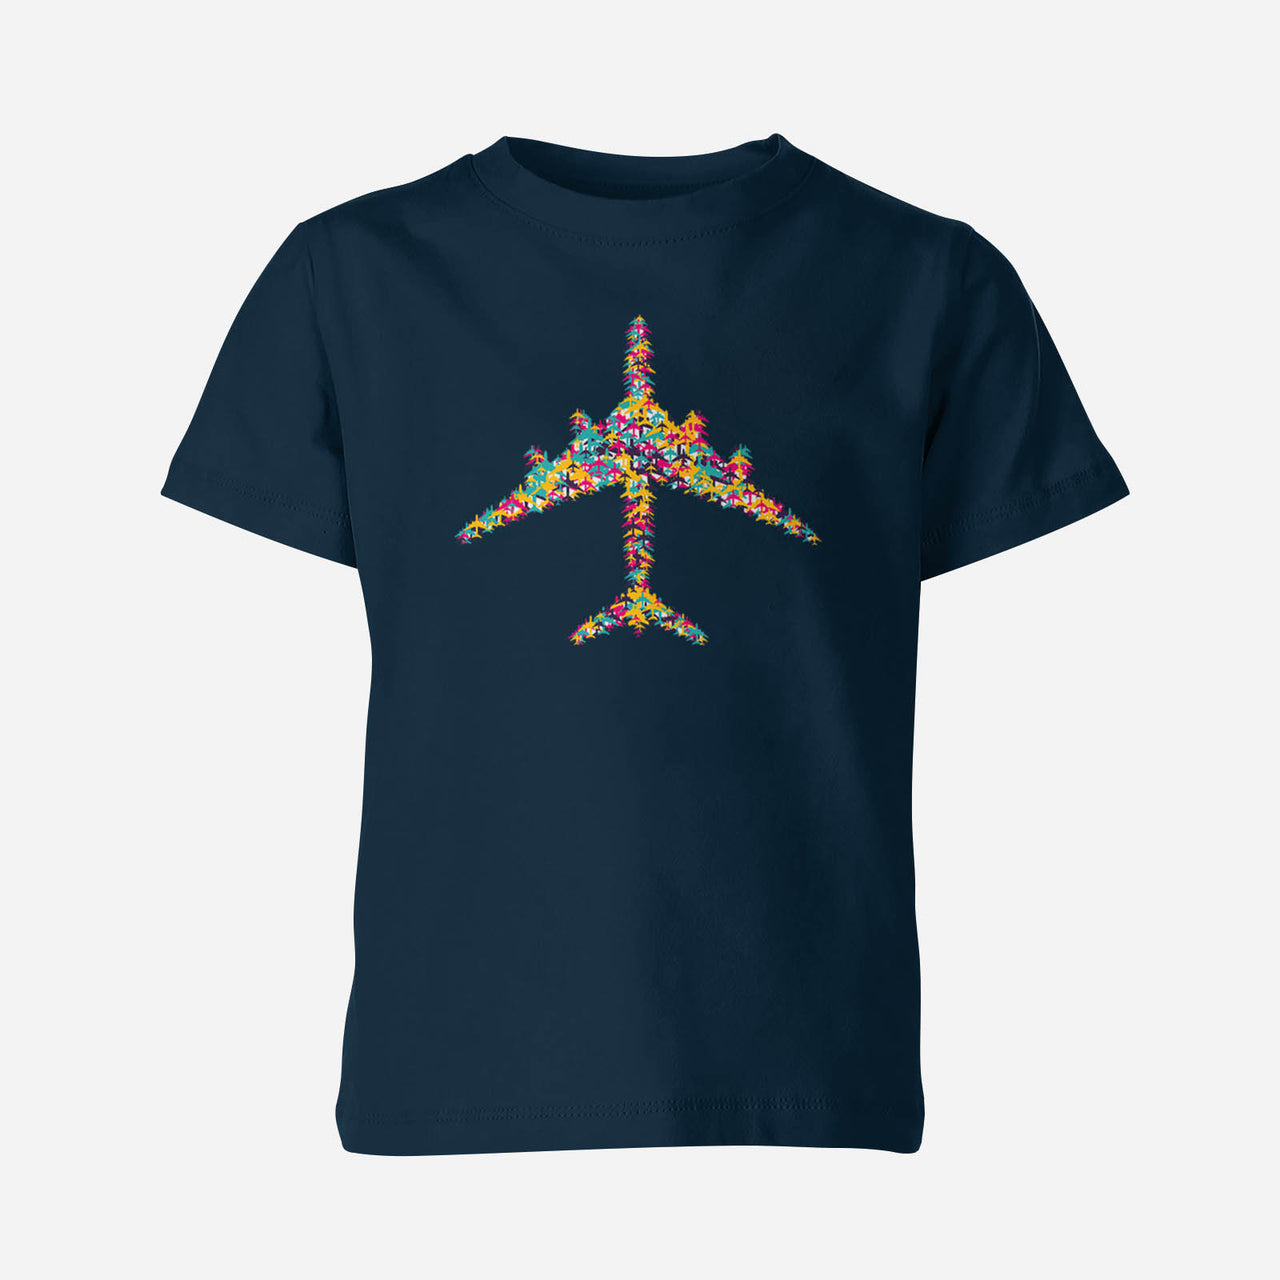 Colourful Airplane Designed Children T-Shirts